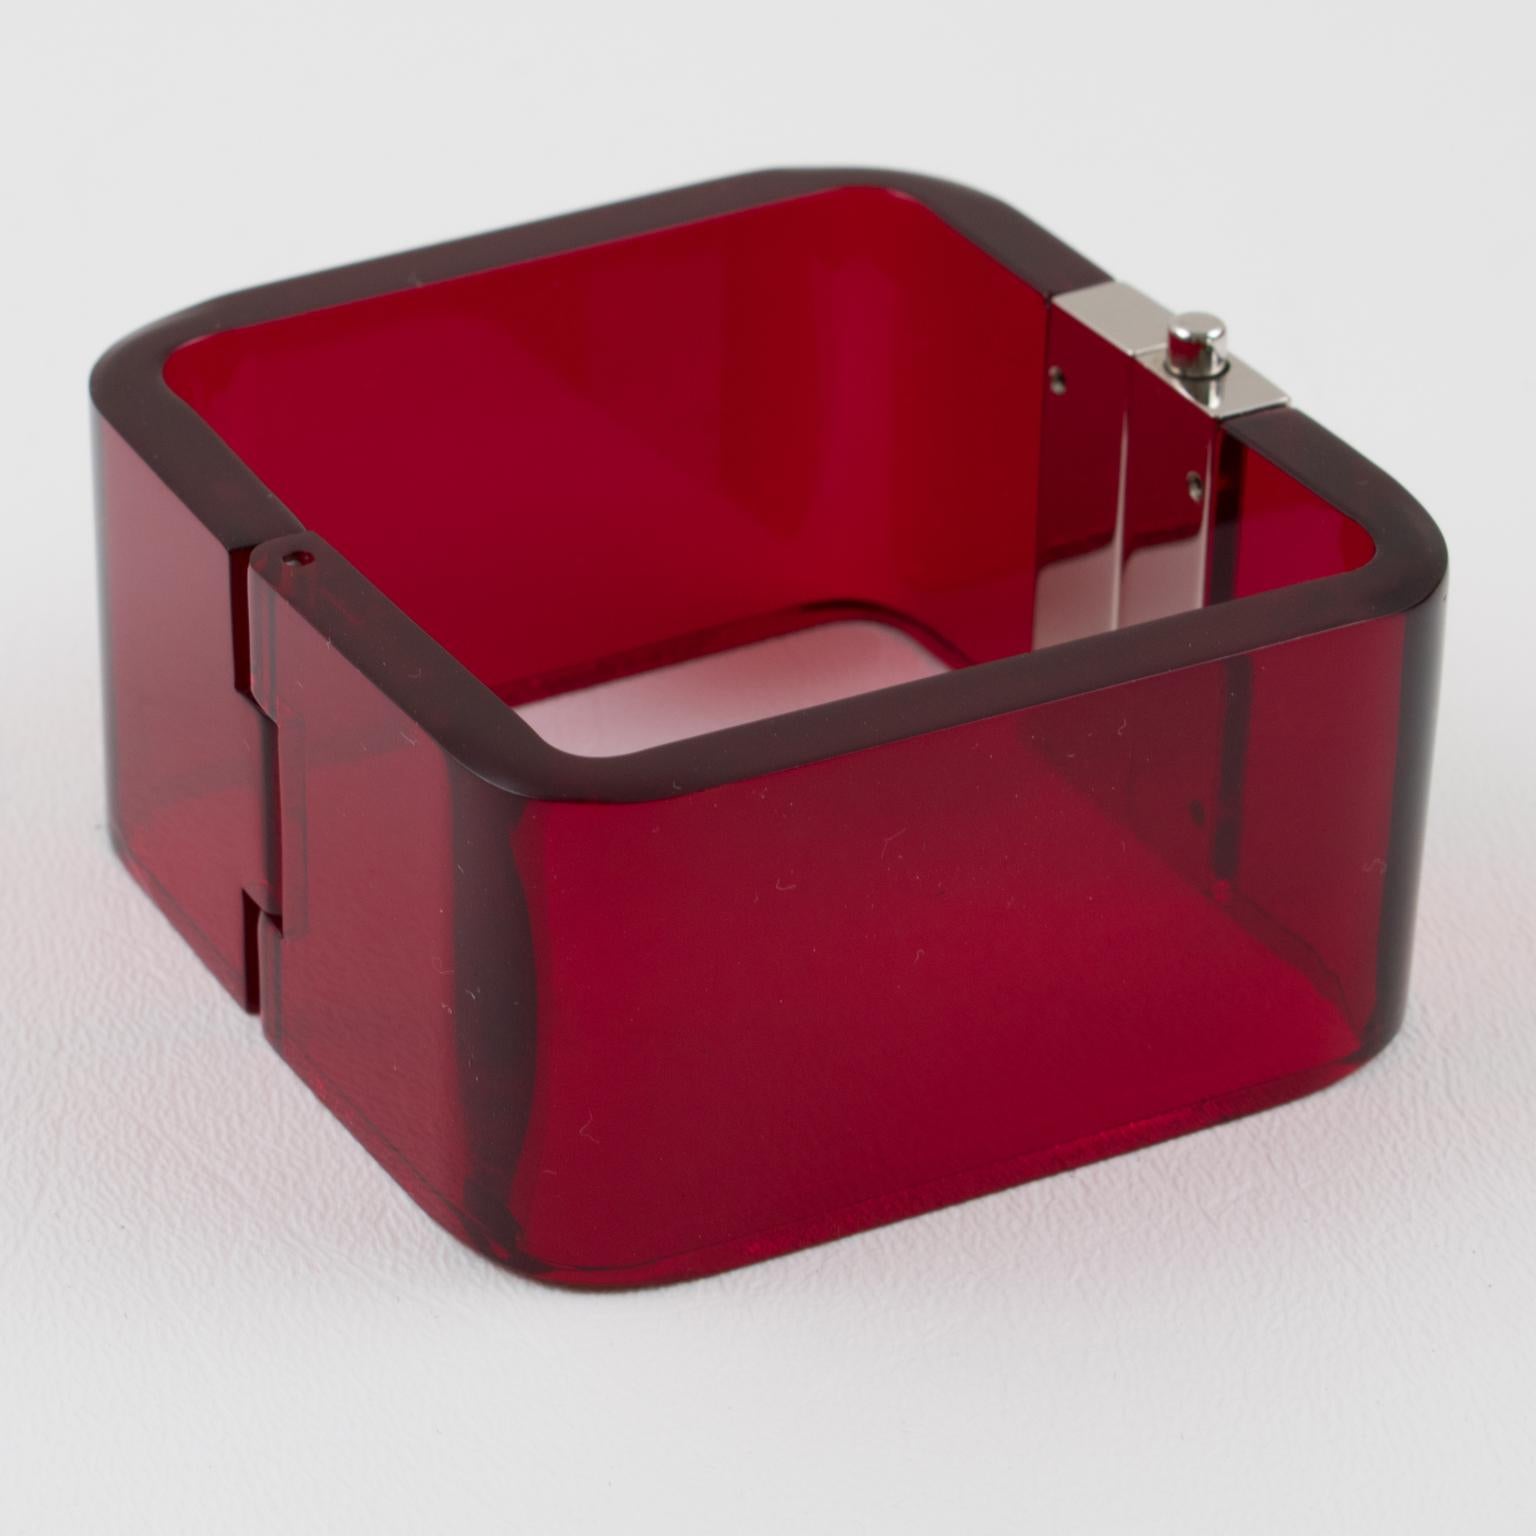 This gorgeous original Bottega Veneta Italy signed clamper bangle bracelet boasts a chunky square shape with transparent ruby red acrylic or Lucite complemented with large chromed metal clamper fastening. The piece is engraved on the outside of the